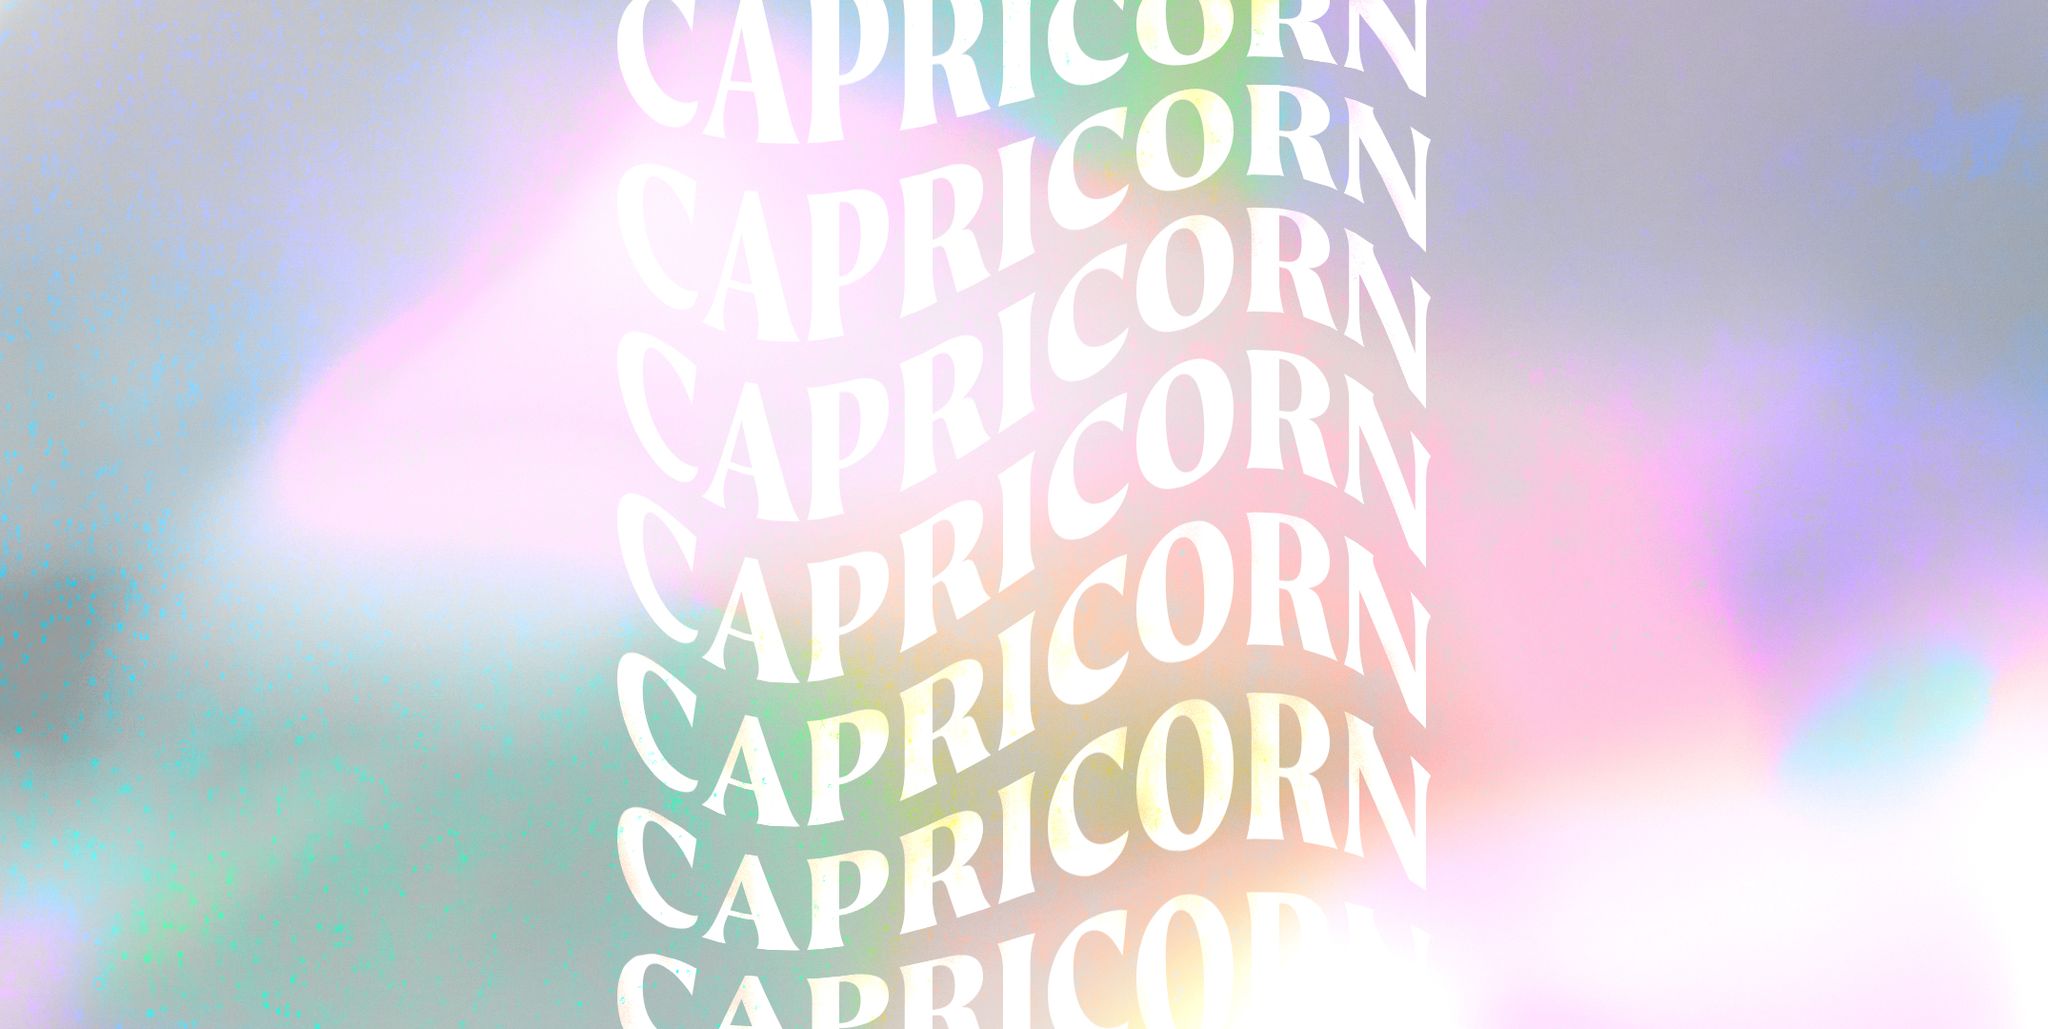 Capricorn Traits And Dates - What To Know About Capricorns